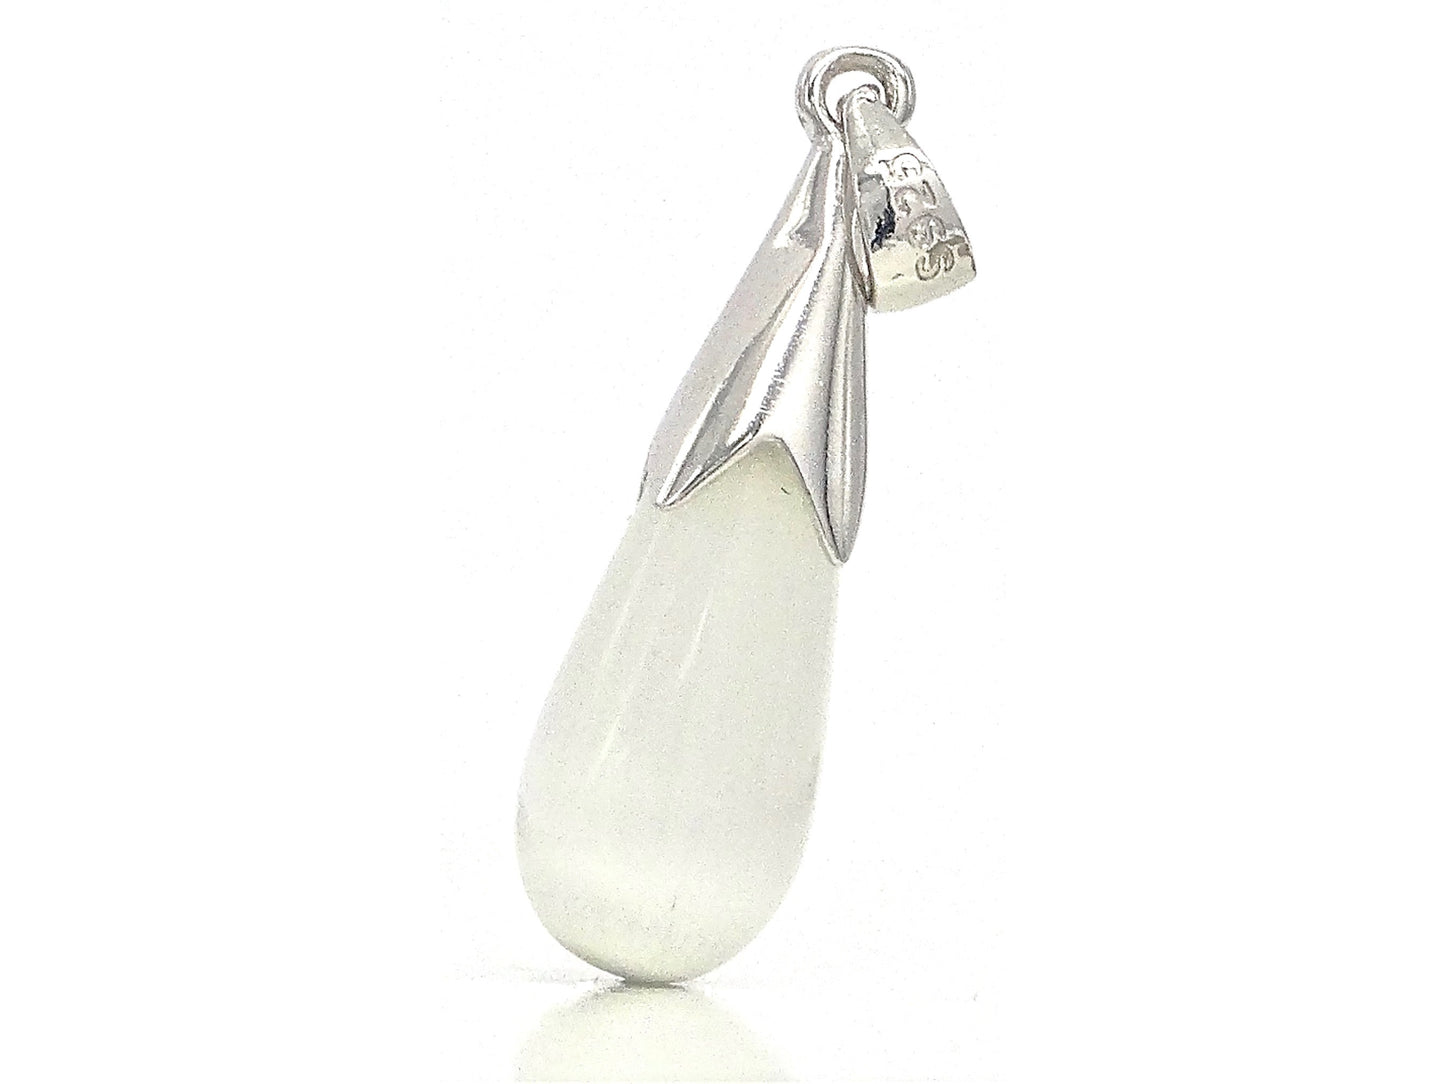 White moonstone fall silver necklace PENDANT